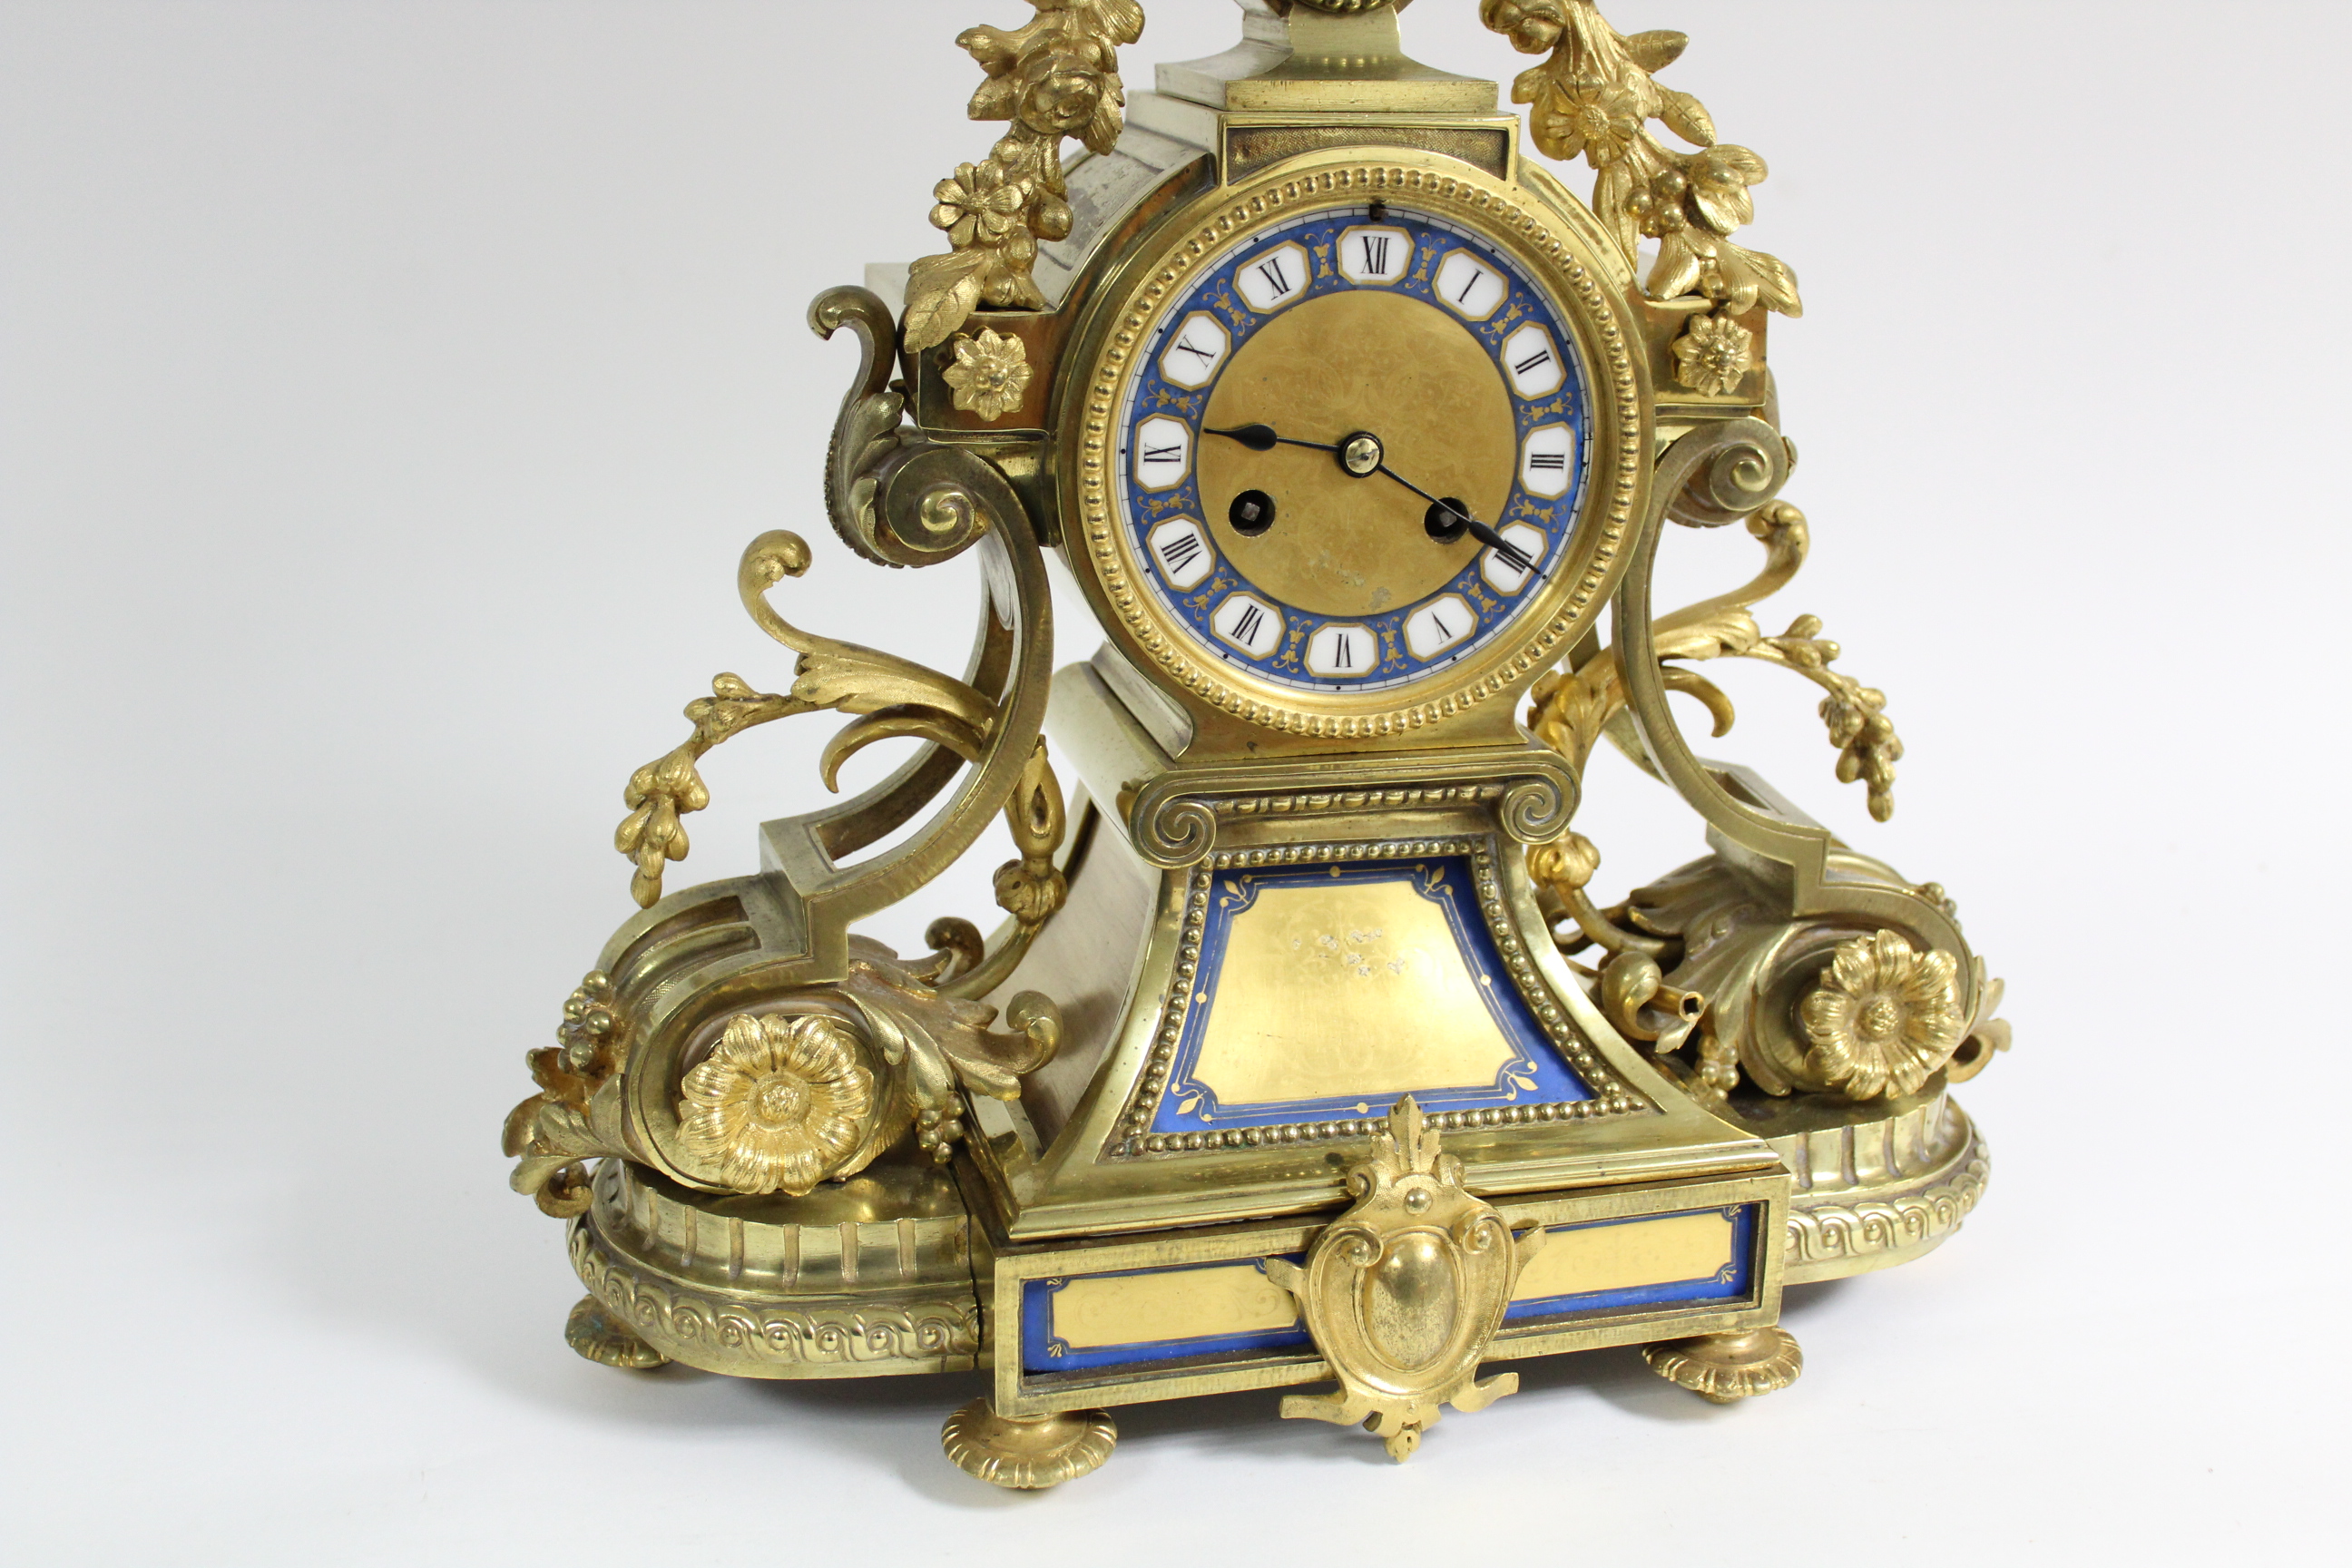 A mid-19th century French mantel clock in elaborate gilt brass case with pendant flowers & leaf- - Image 3 of 7